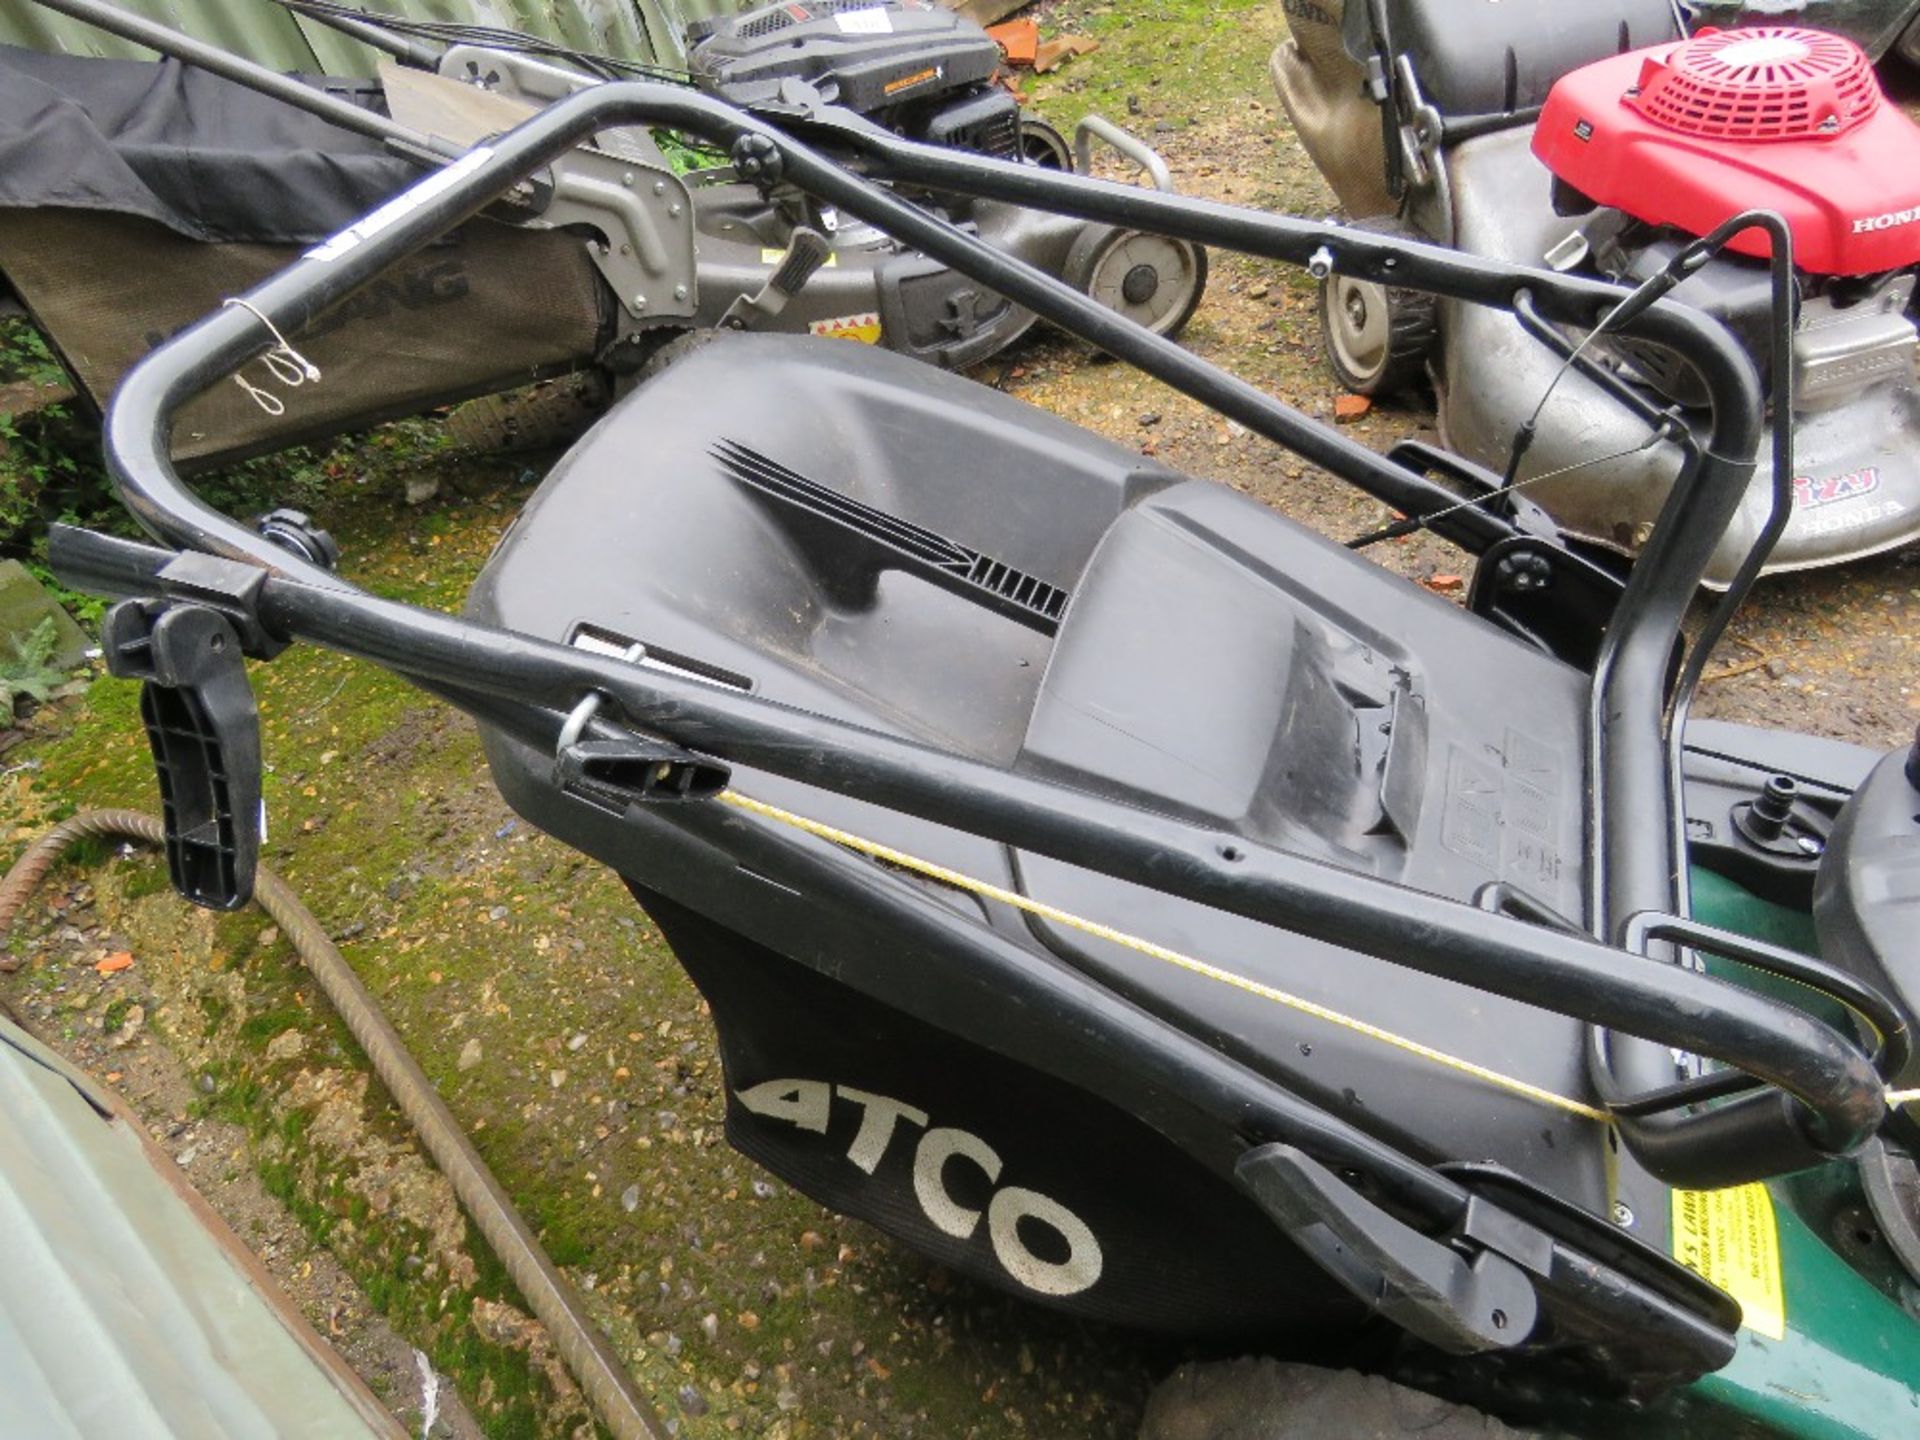 ATCO LAWNMOWER WITH A COLLECTOR. DIRECT FROM LOCAL LANDSCAPE COMPANY WHO ARE CLOSING A DEPOT. - Image 3 of 3